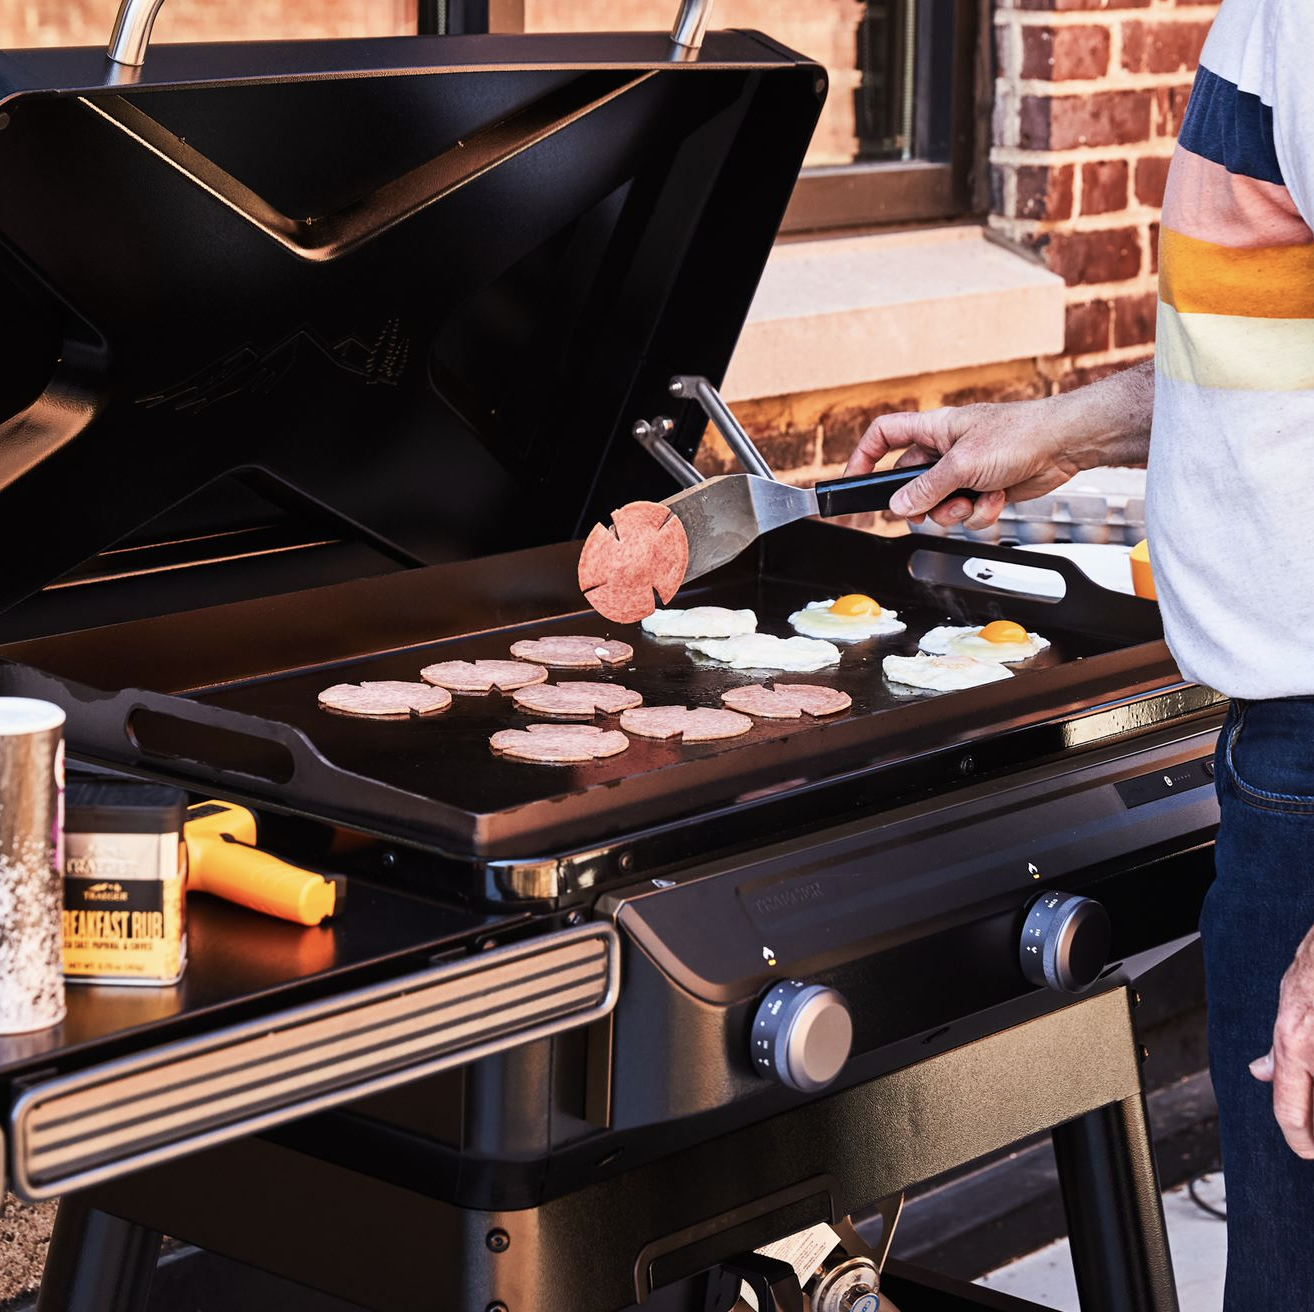 Get One of These Versatile Flat-Top Grills and Be the Star of Your Own Diners, Drive-ins, and Dives